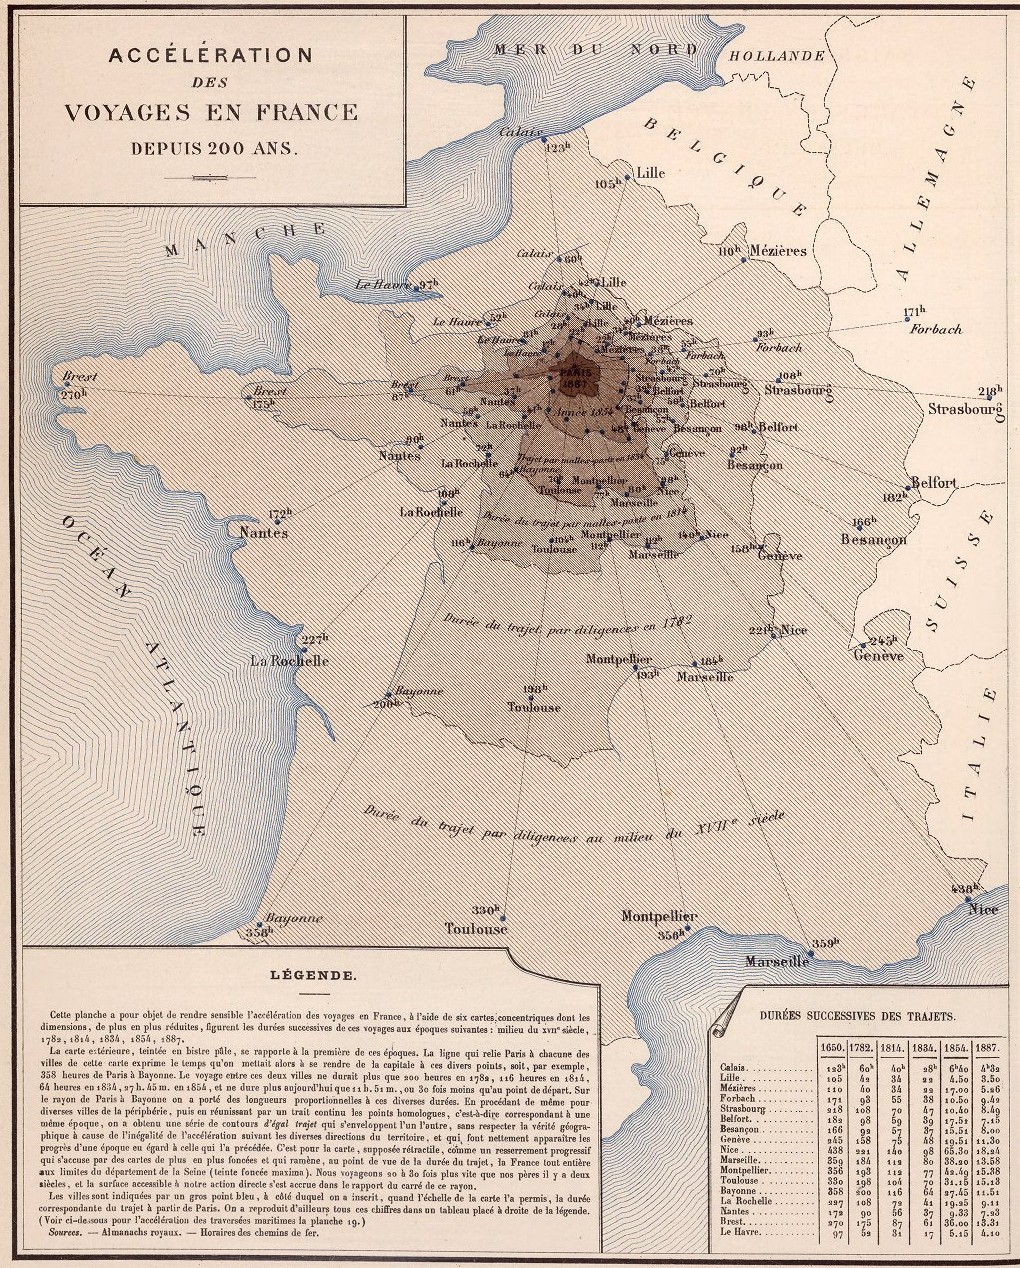 Anamorphic map: “Acceleration of travel in France over 200 years” (Accélération des voyages en France depuis 200 Ans). A set of five Paris-centric maps scaled along radial directions to major cities to show the relative decrease in travel time from 1789 to 1887.